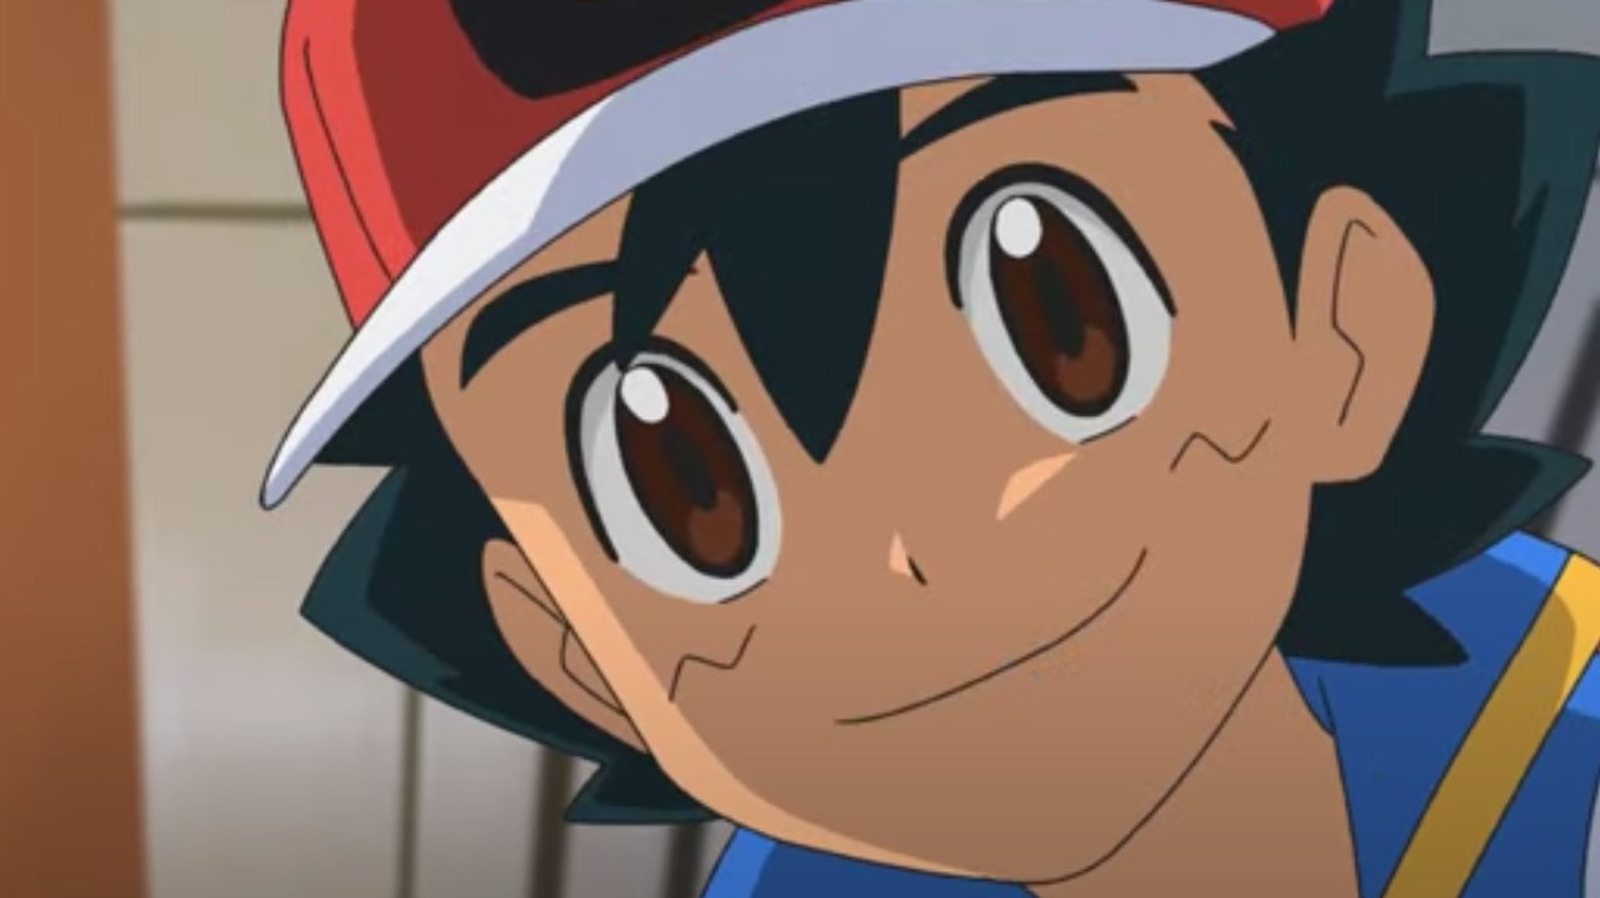 Pokémon's Ash Ketchum Becomes 'Very Best' Trainer in Series